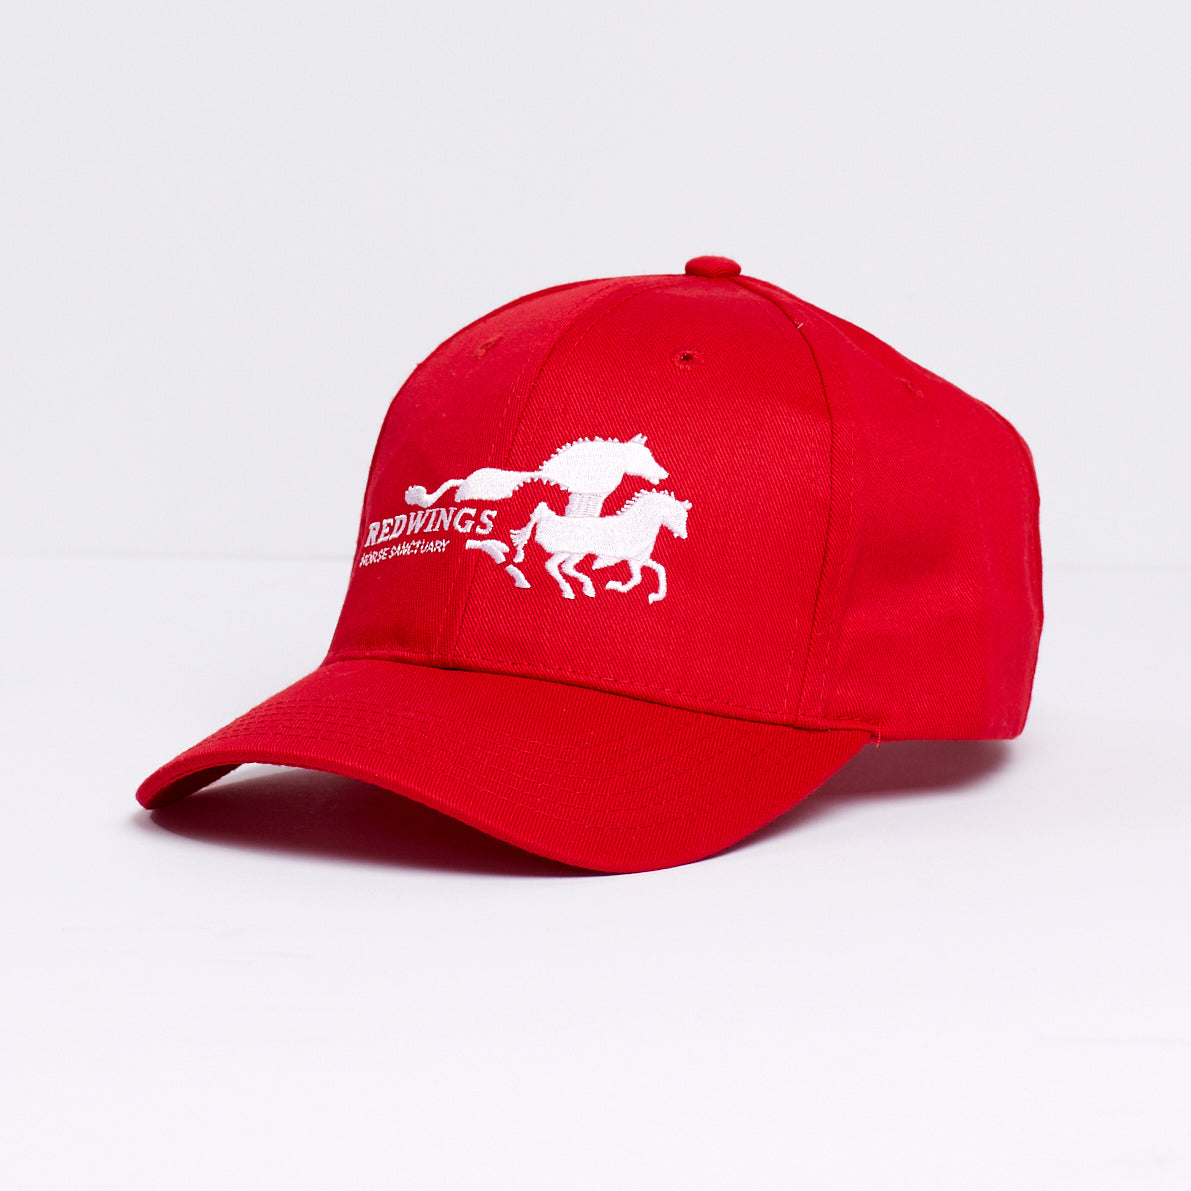 image shows a red baseball cap with our Redwings white logo embroidered in the centre